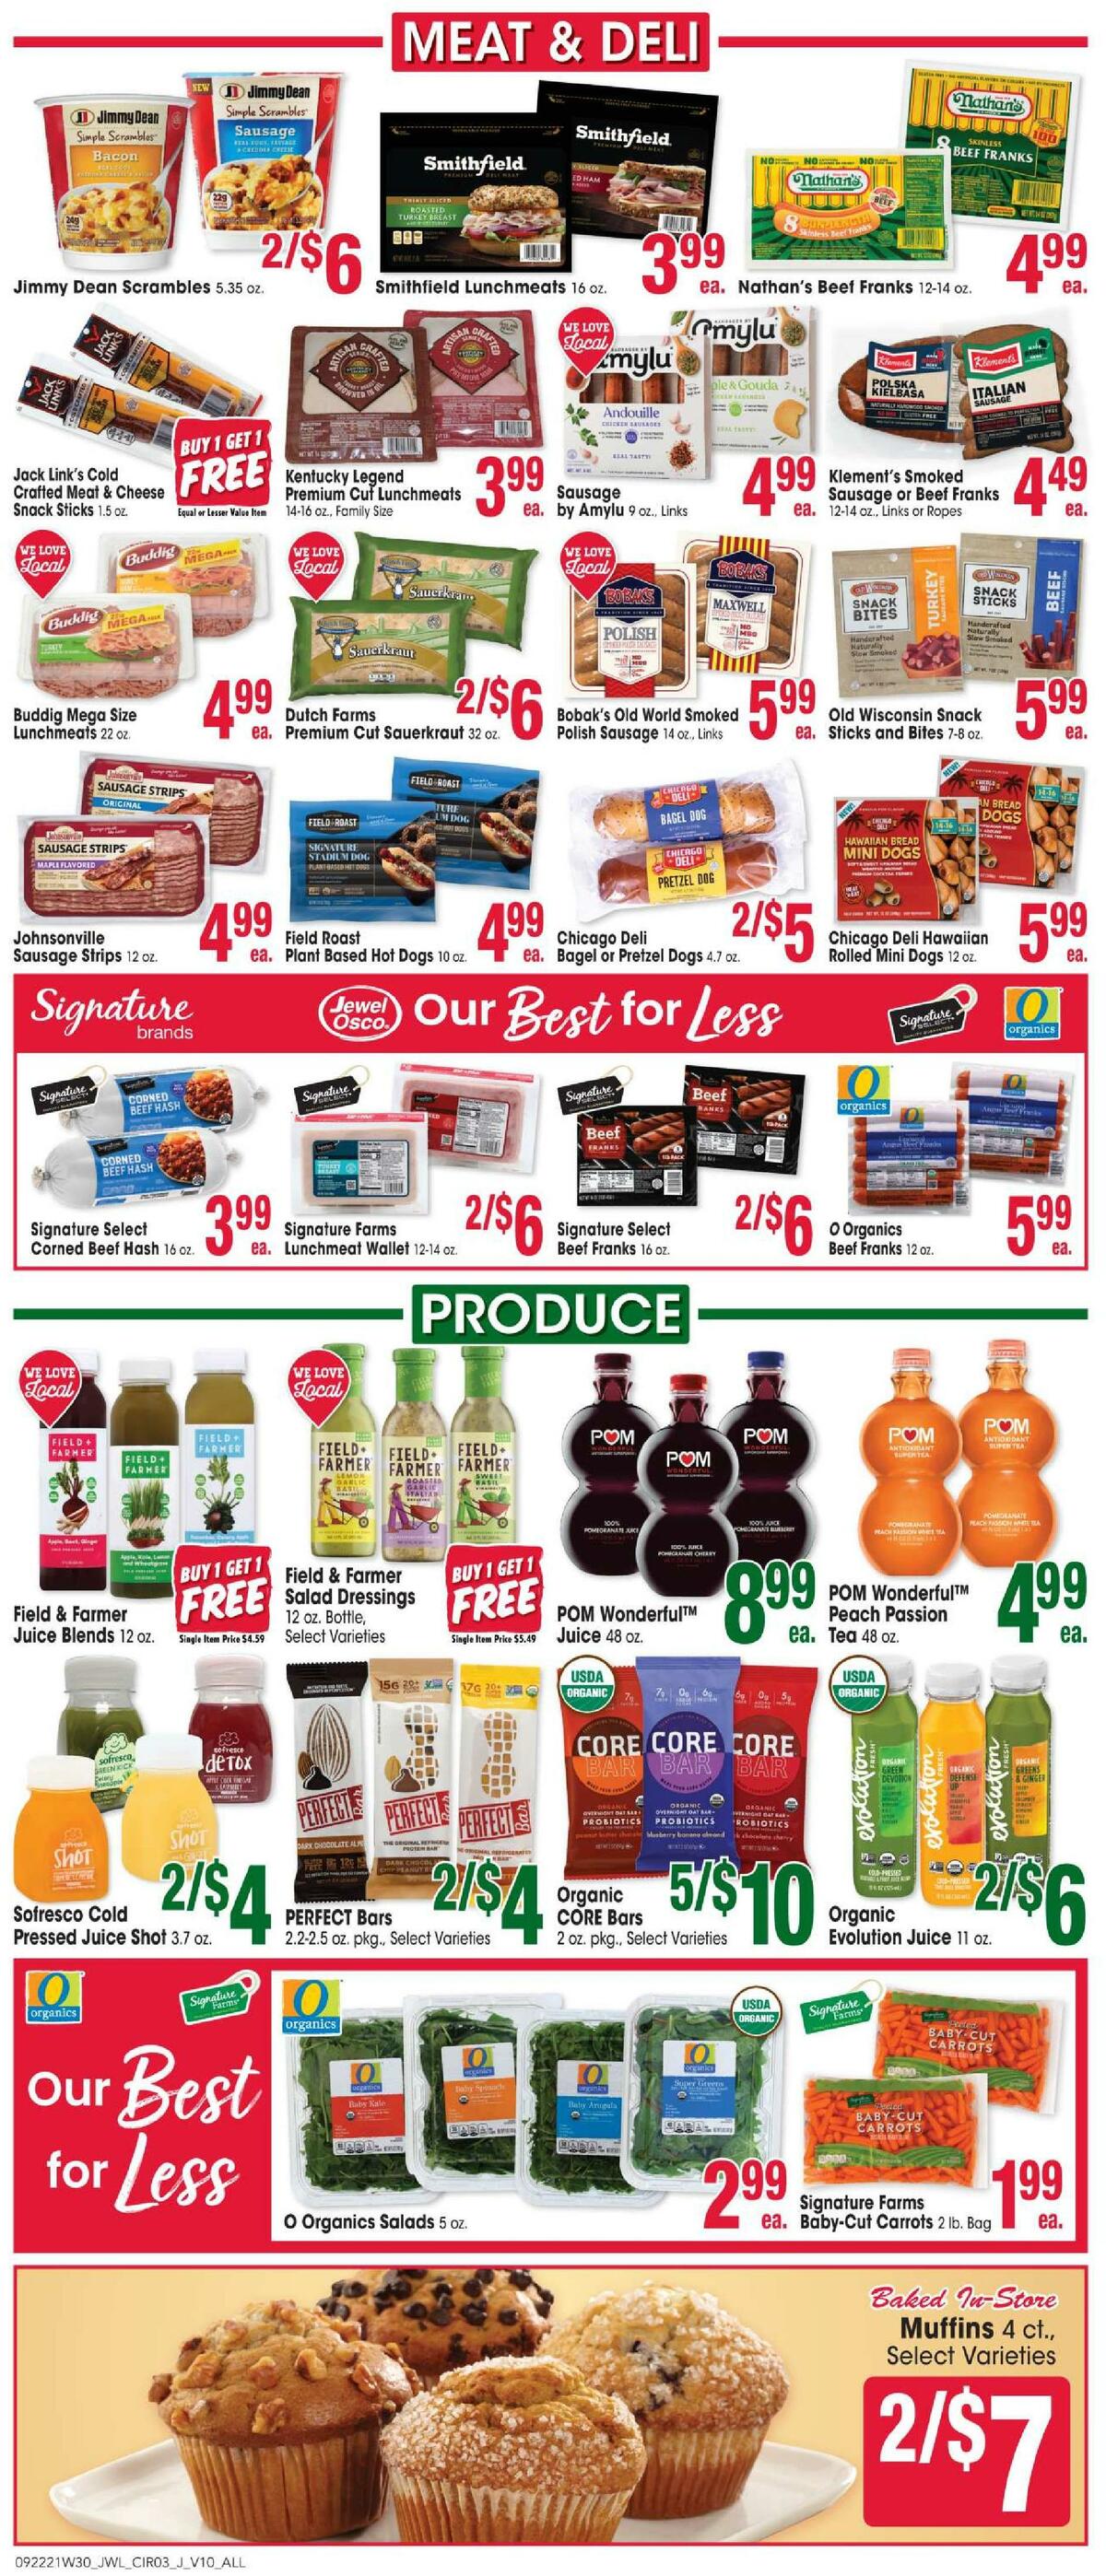 Jewel Osco Weekly Ad from September 22